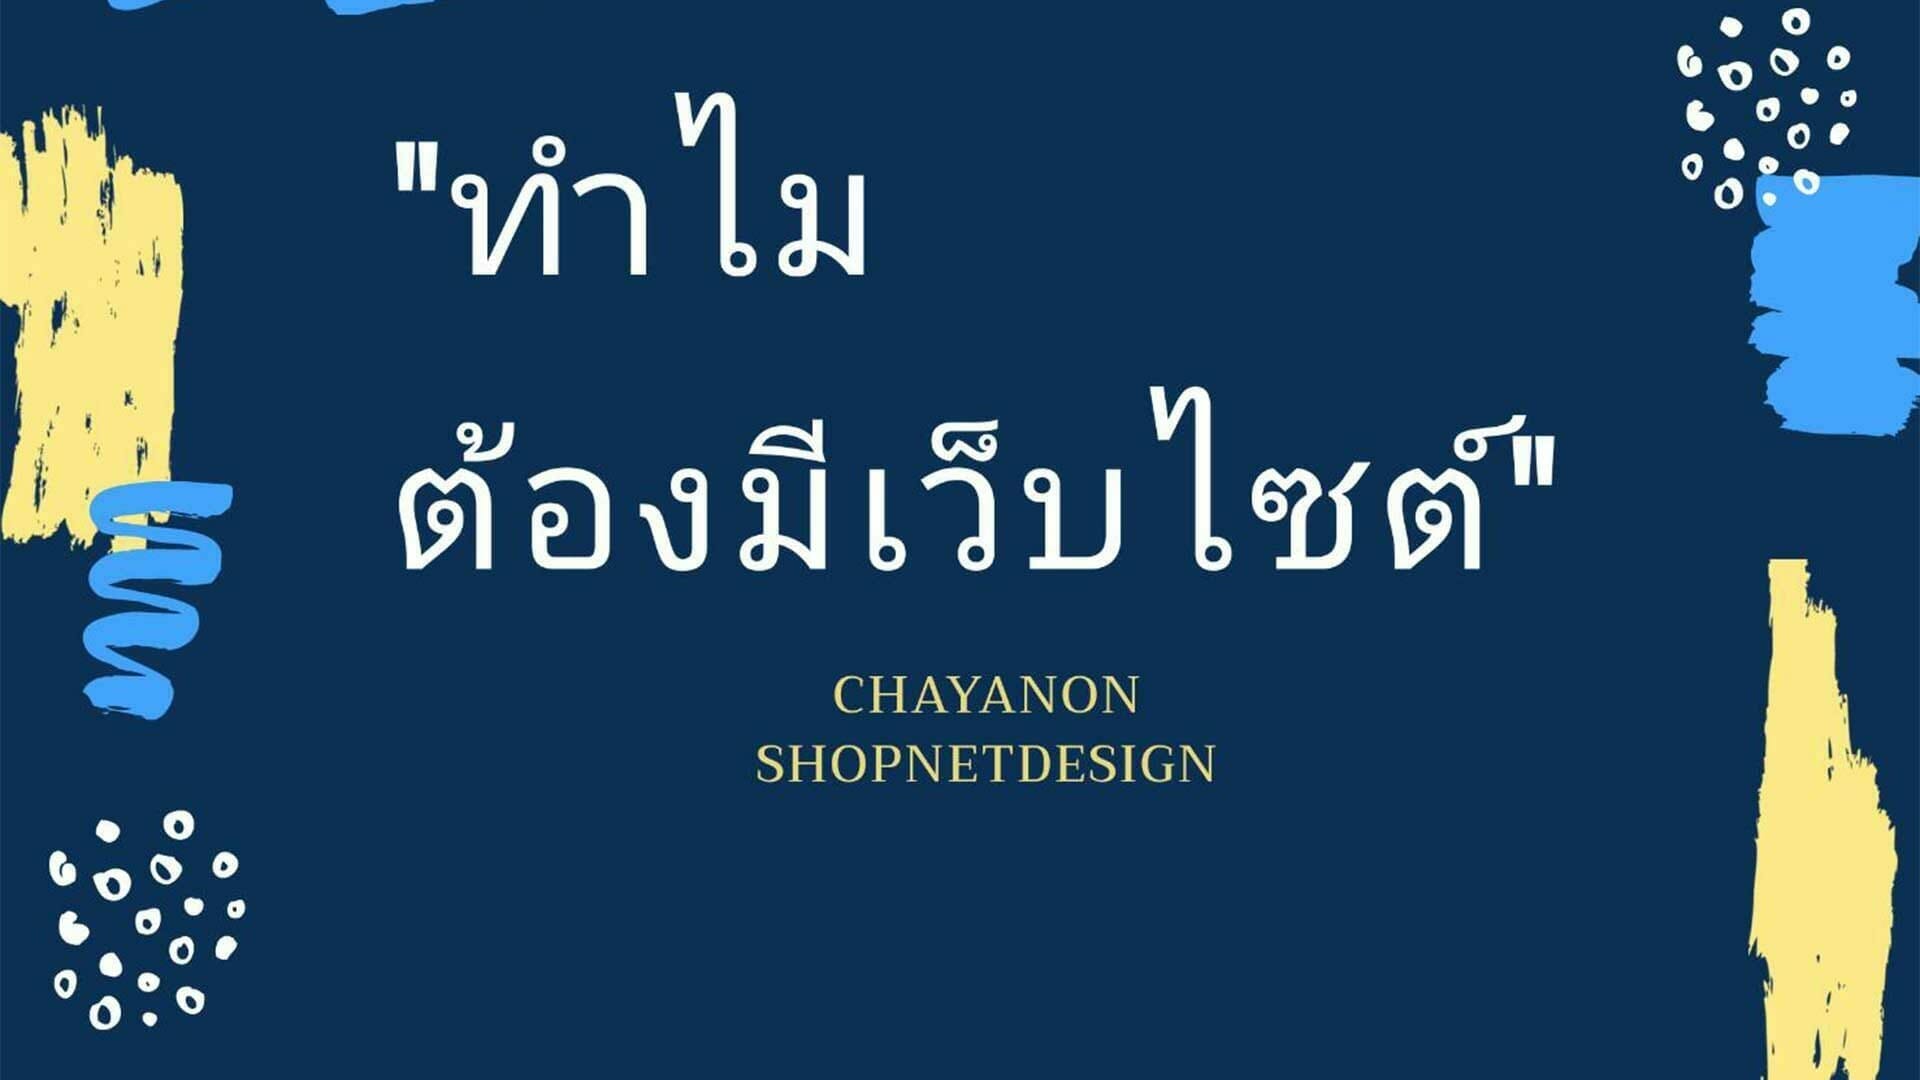 Why have a website ? ทำไมต้องมีเว็บไซต์